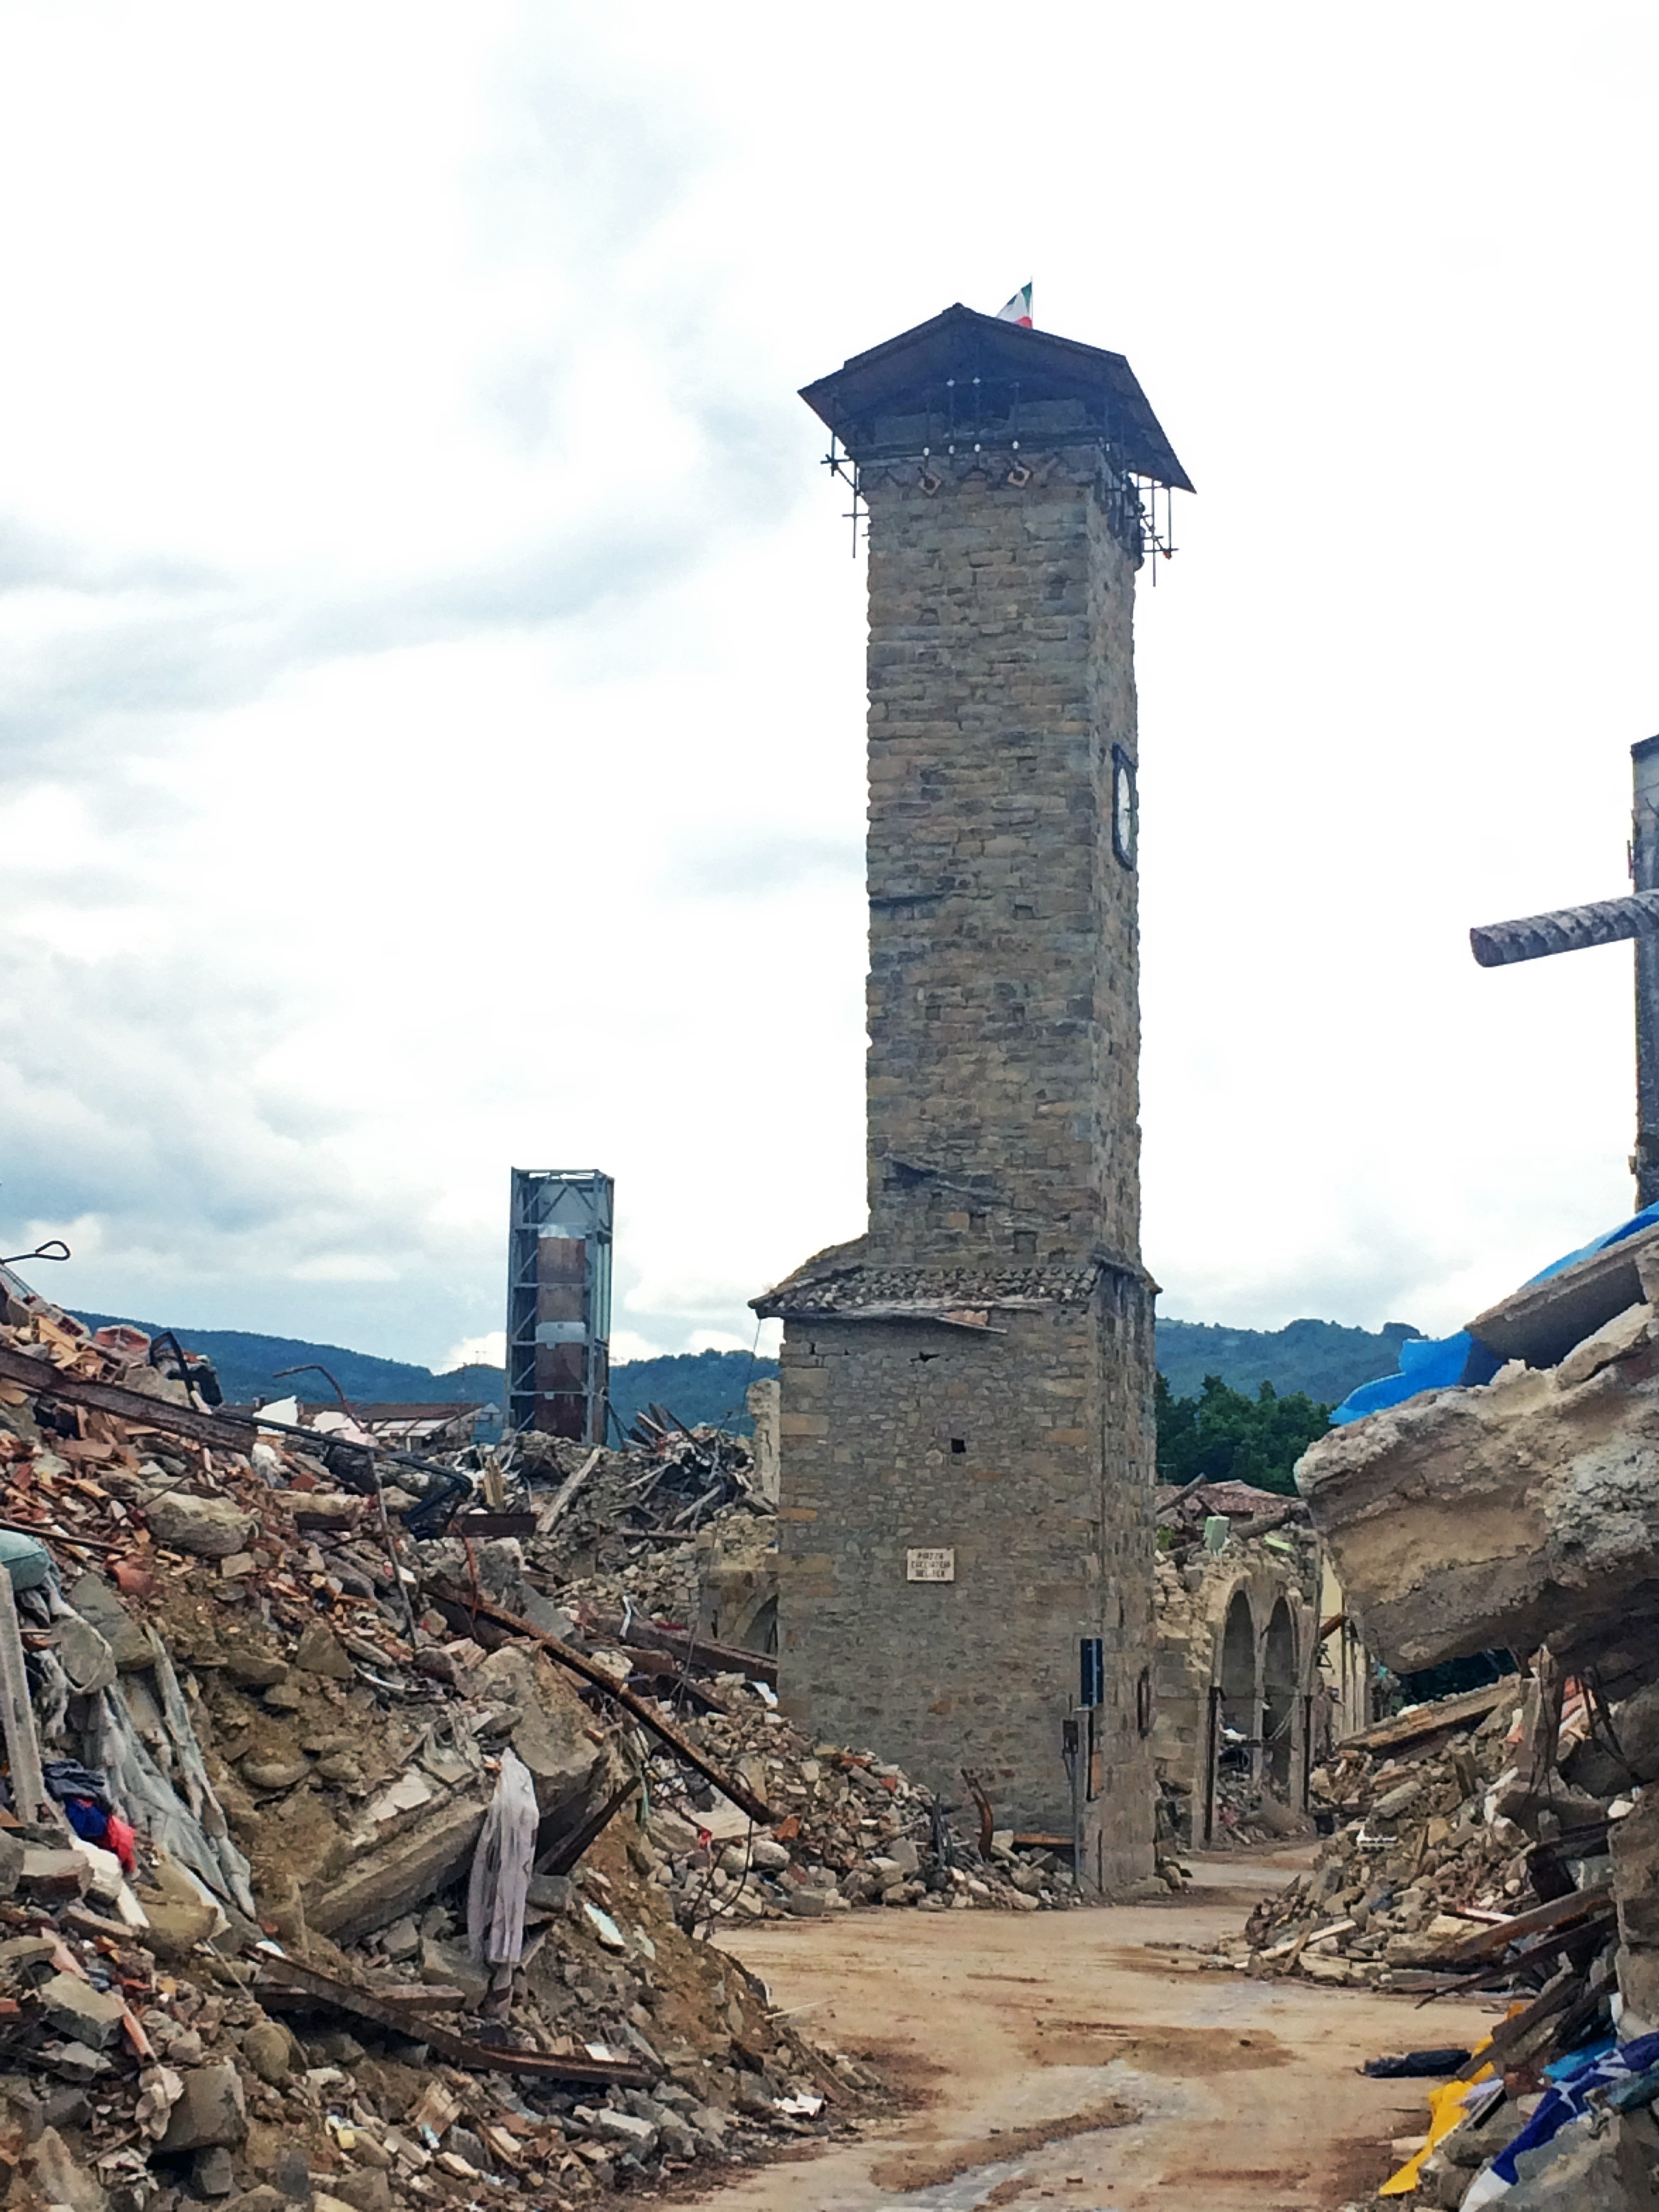 Effects of the Norcia earthquake on the built environment